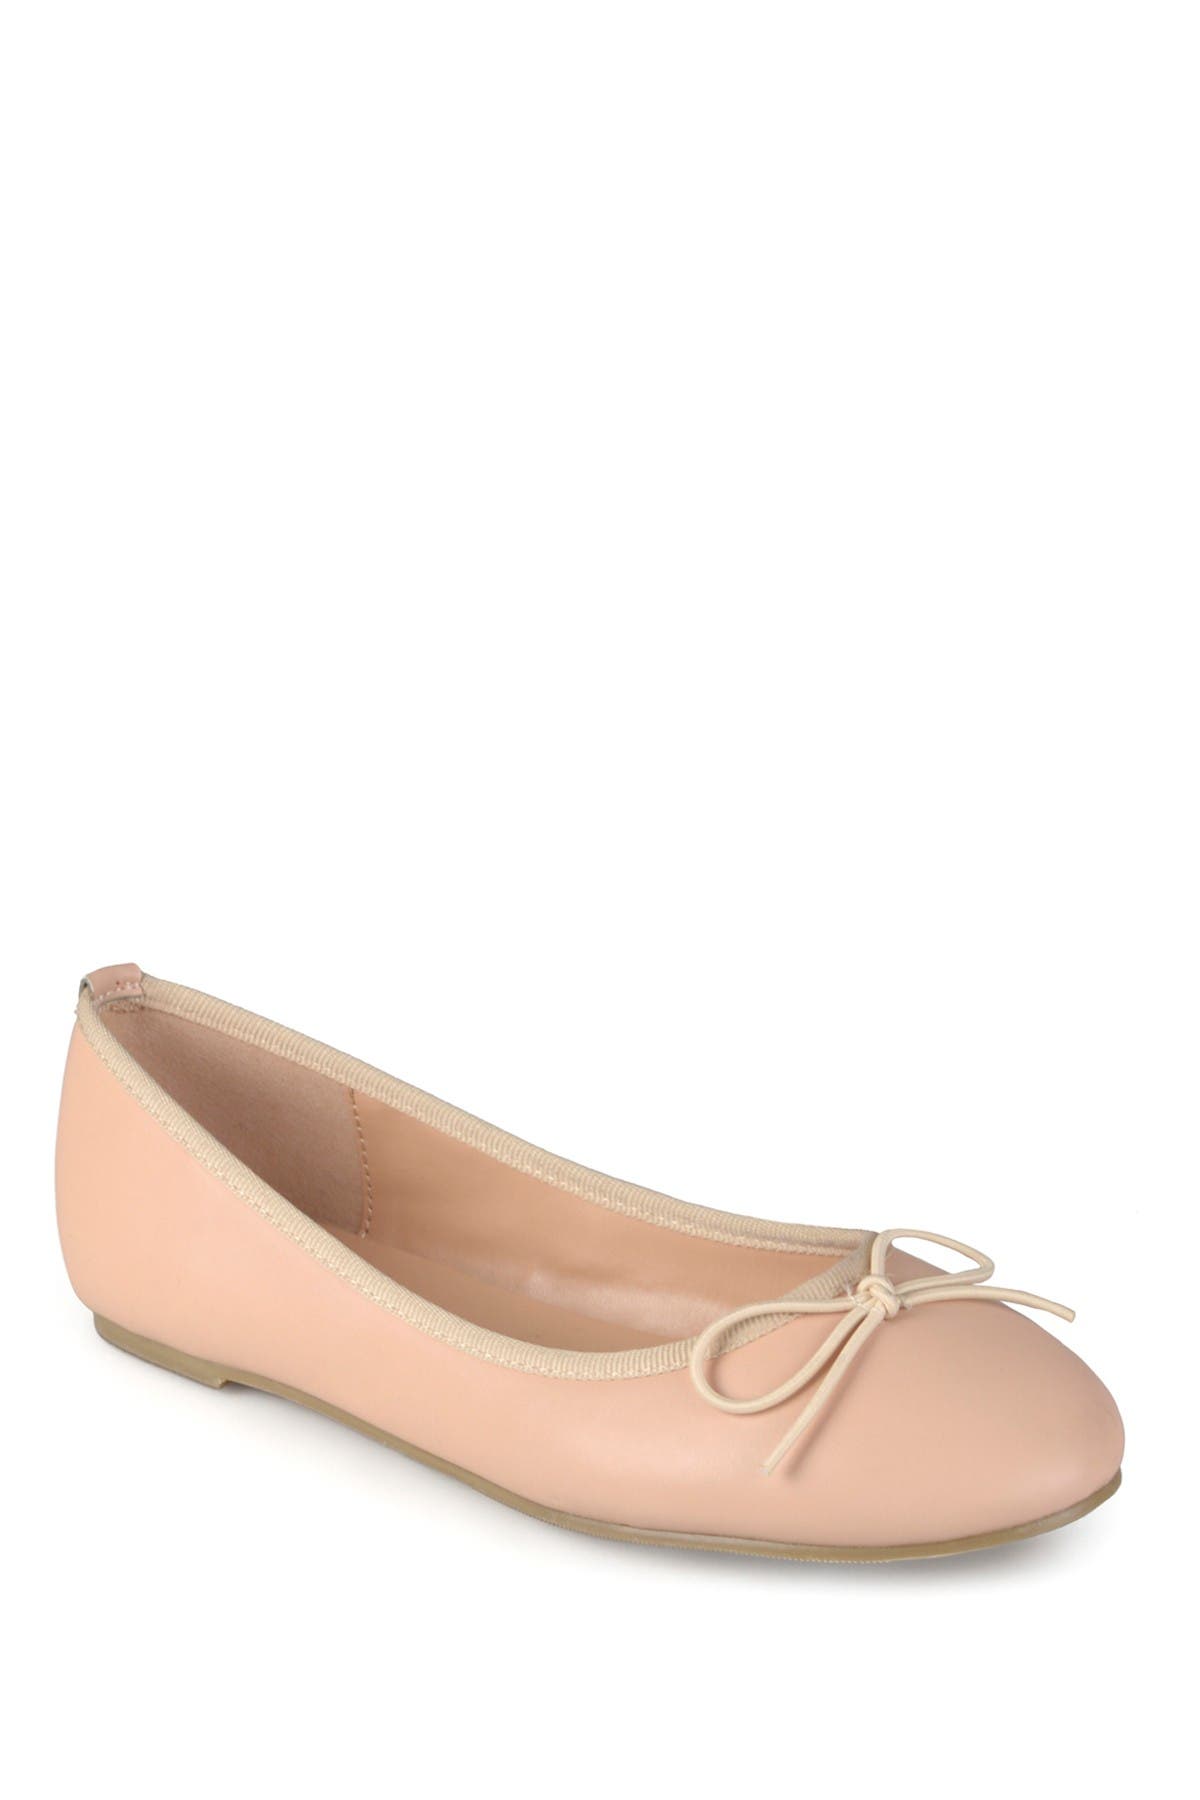 JOURNEE Collection | Vika Bow Flat | Nordstrom Rack